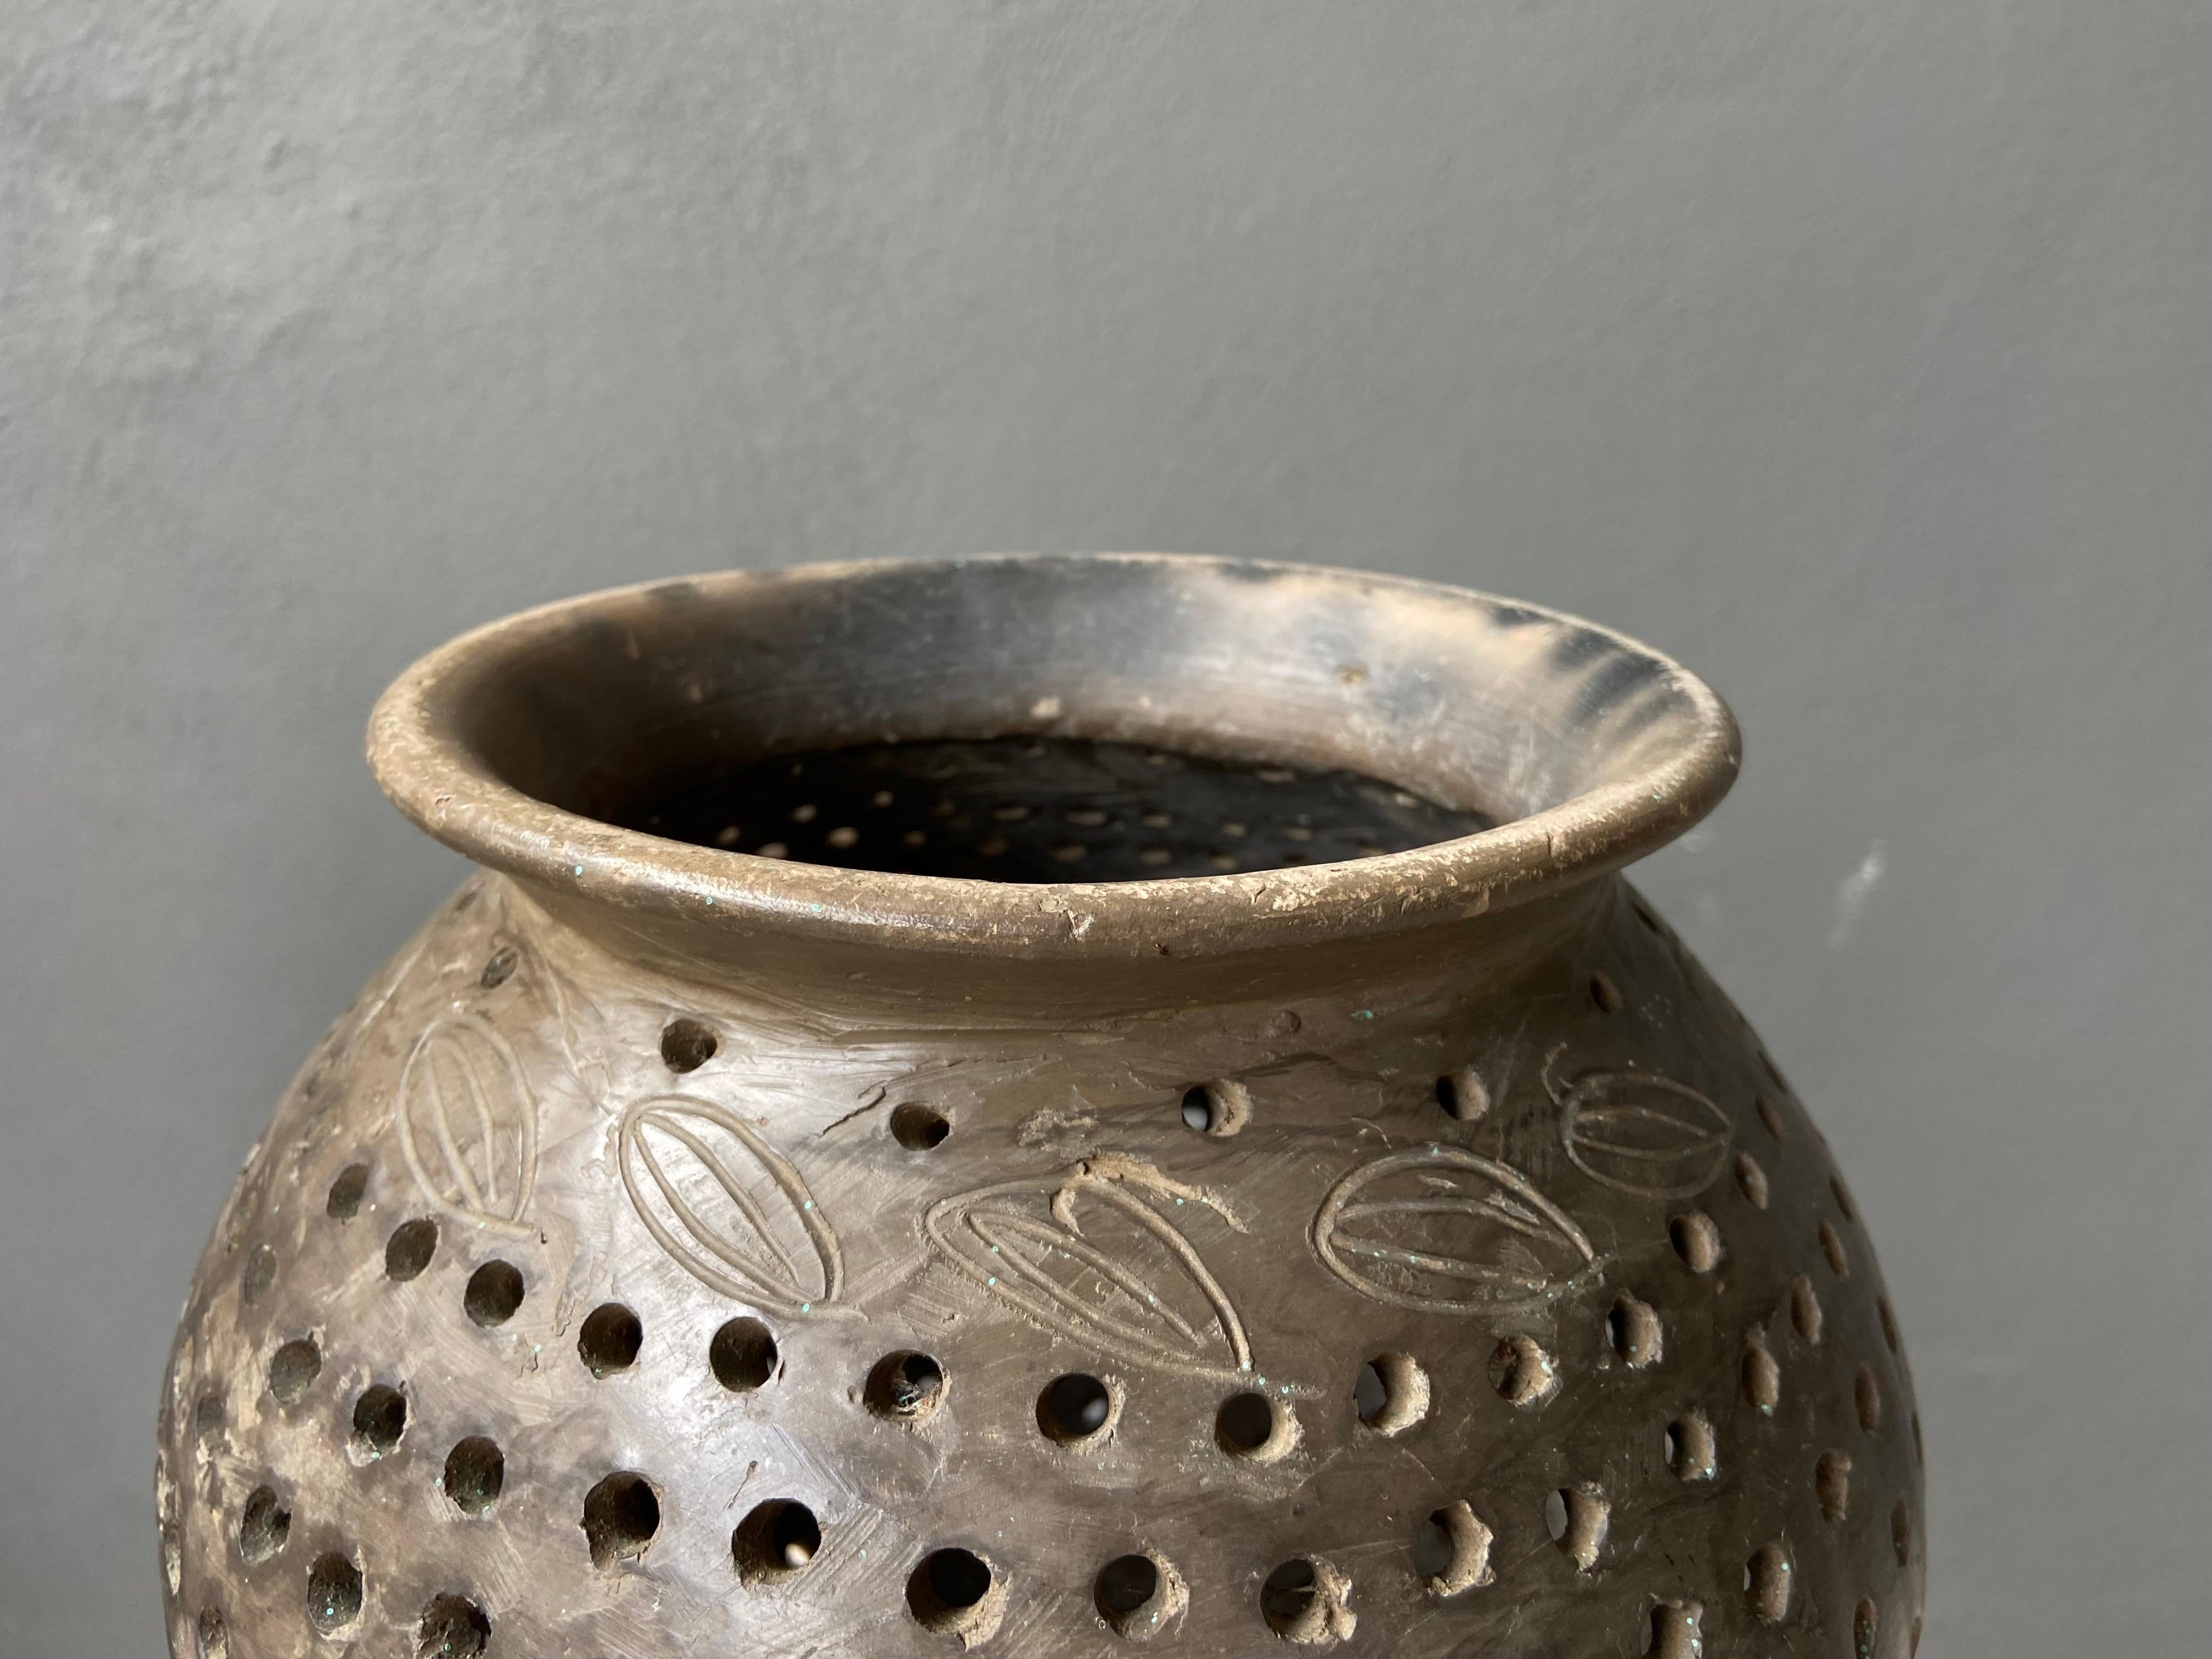 Ceramic maize strainer from Southern Oaxaca, Mexico, circa 1960's. Often referred to as Olla de Nixtamal, the vessel is used to clean out the maize before the soaking process which is typically done with limewater. This is the ancient way of